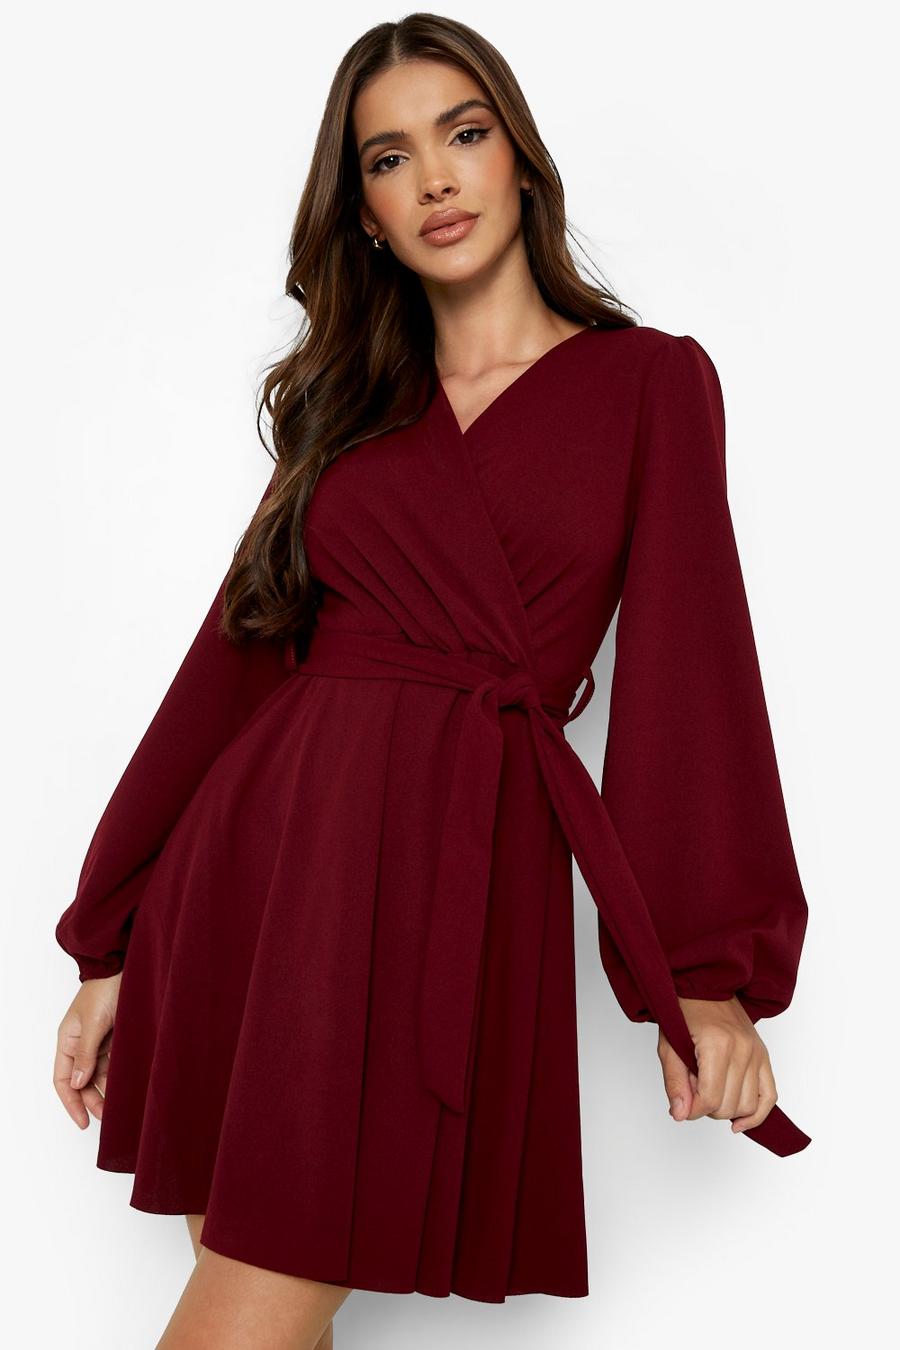 Robe patineuse à manches bouffantes, Wine rouge